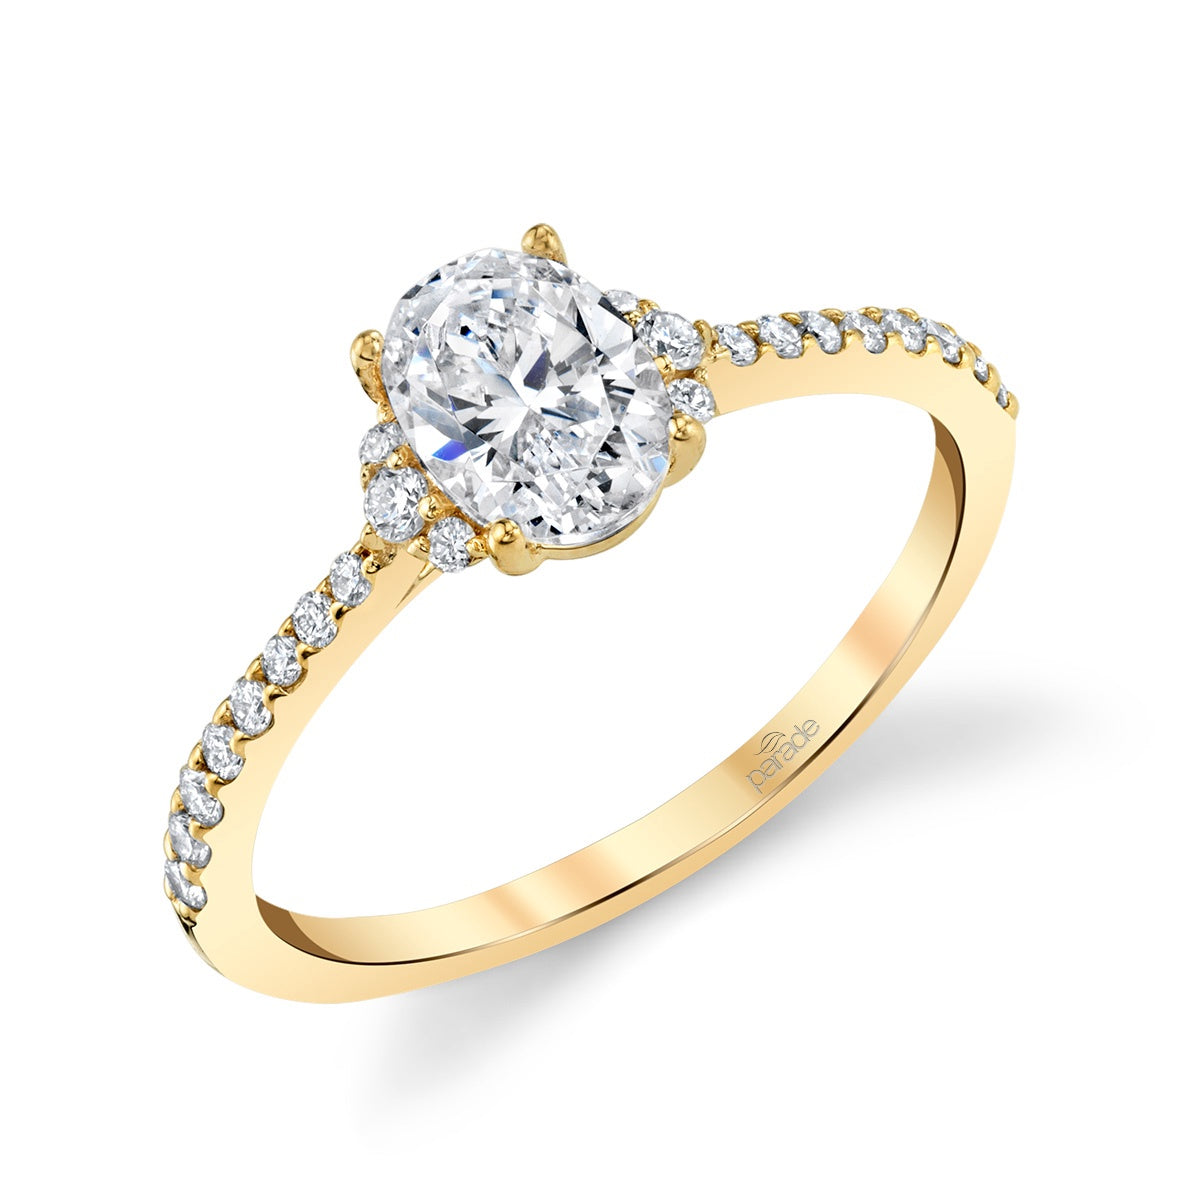 Parade 18KY Oval Center Diamond Engagement Ring